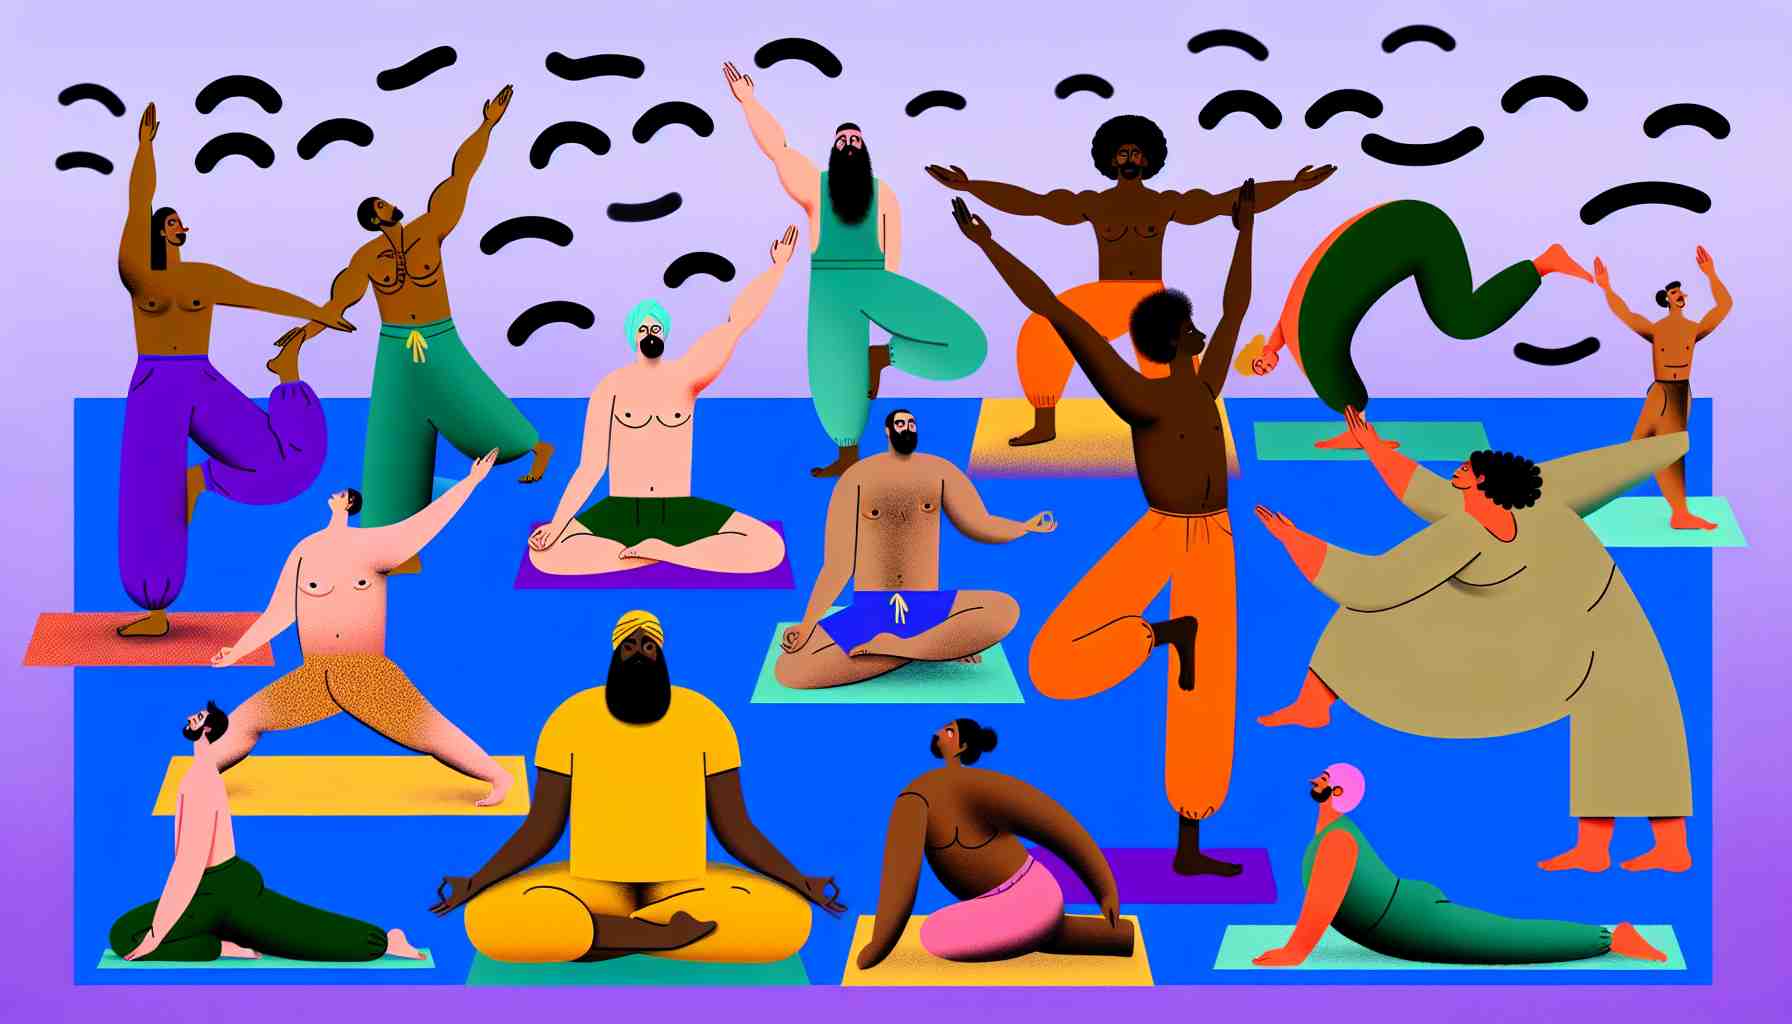 Stripping down for sun salutations? Discover if naked yoga's trendy health boost is fact or fiction. Embrace bravery, body positivity, and possibly a bolstered immune system.